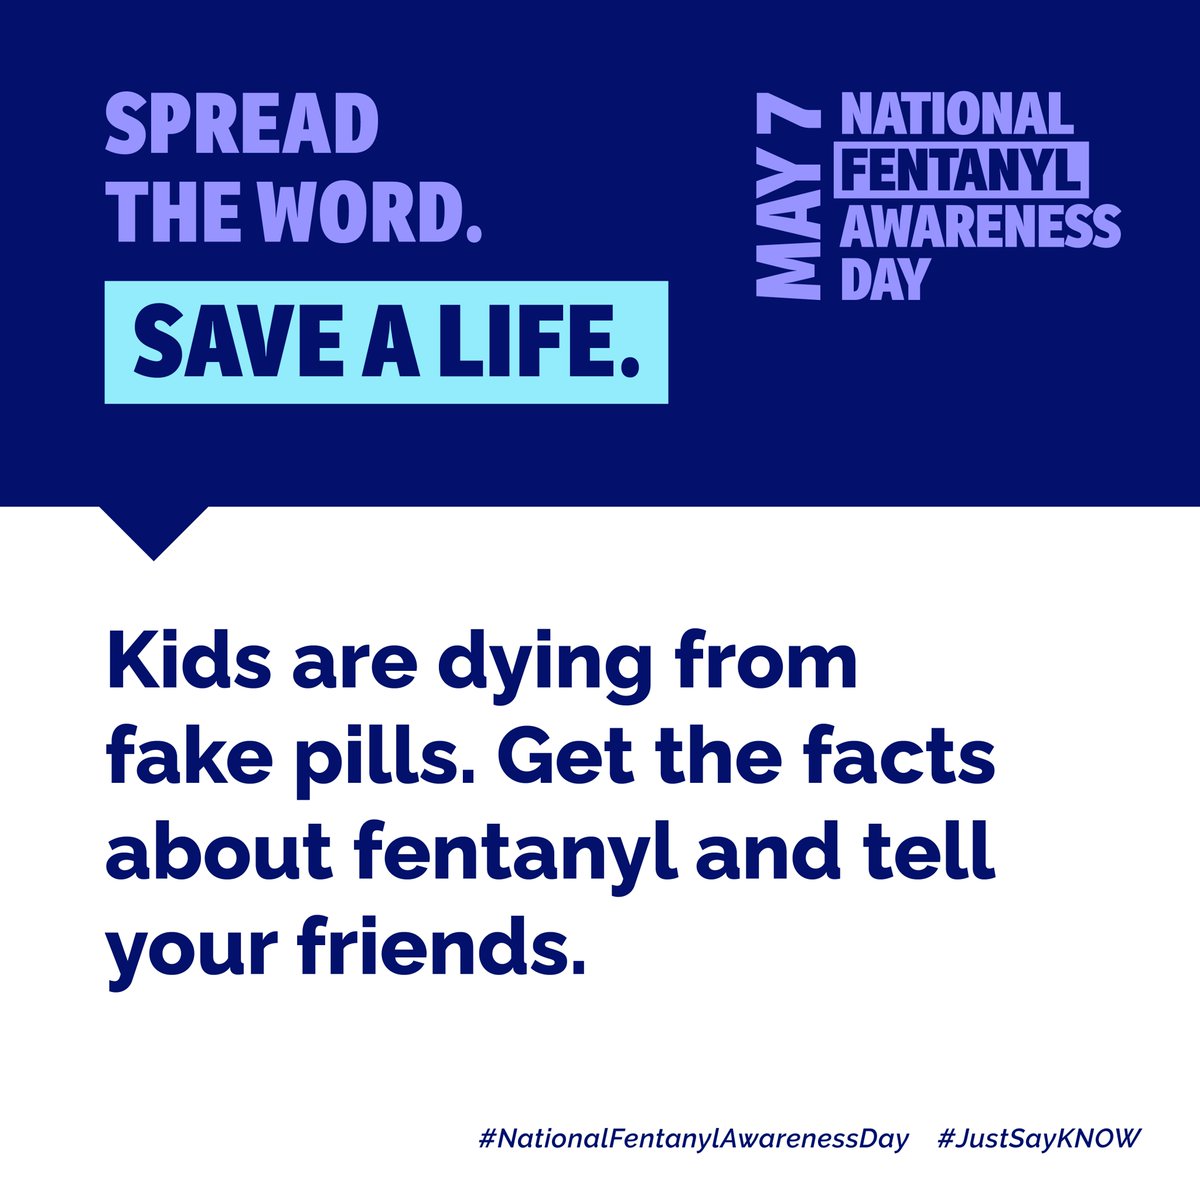 Fentanyl is used to make fake pills disguised as Oxycontin, Percocet and Xanax. You can’t fix real stress with fake pills. Take action and help your friends find the support they really need. For more information head to fentanylawarenessday.org. #NoRandomPills